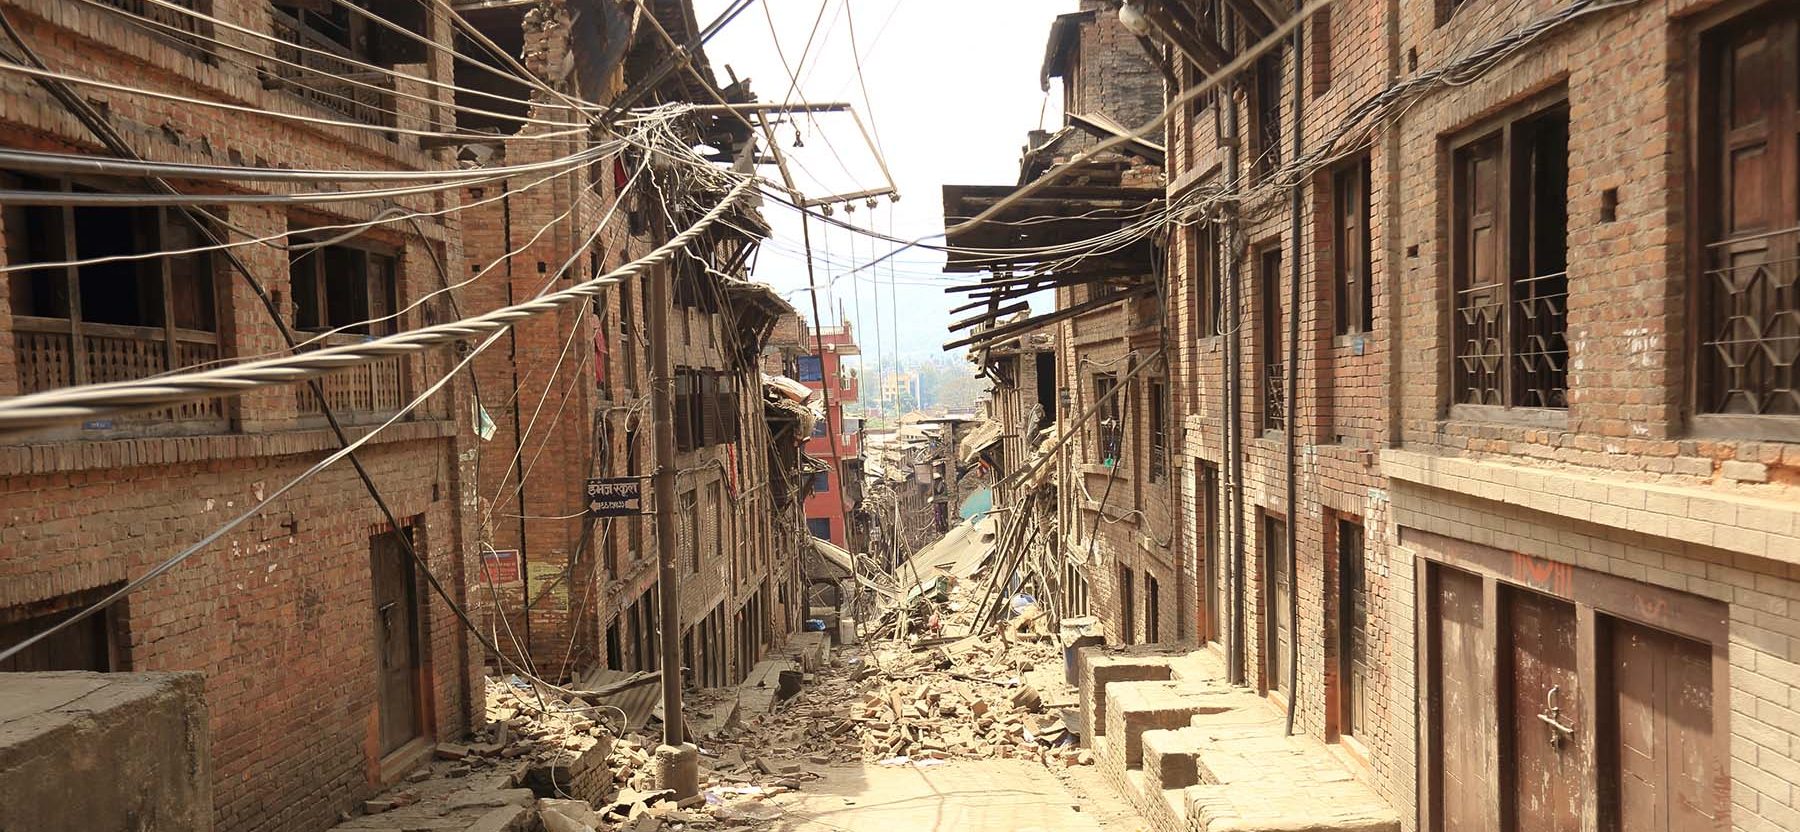 Nepal earthquake: UK disaster experts to help